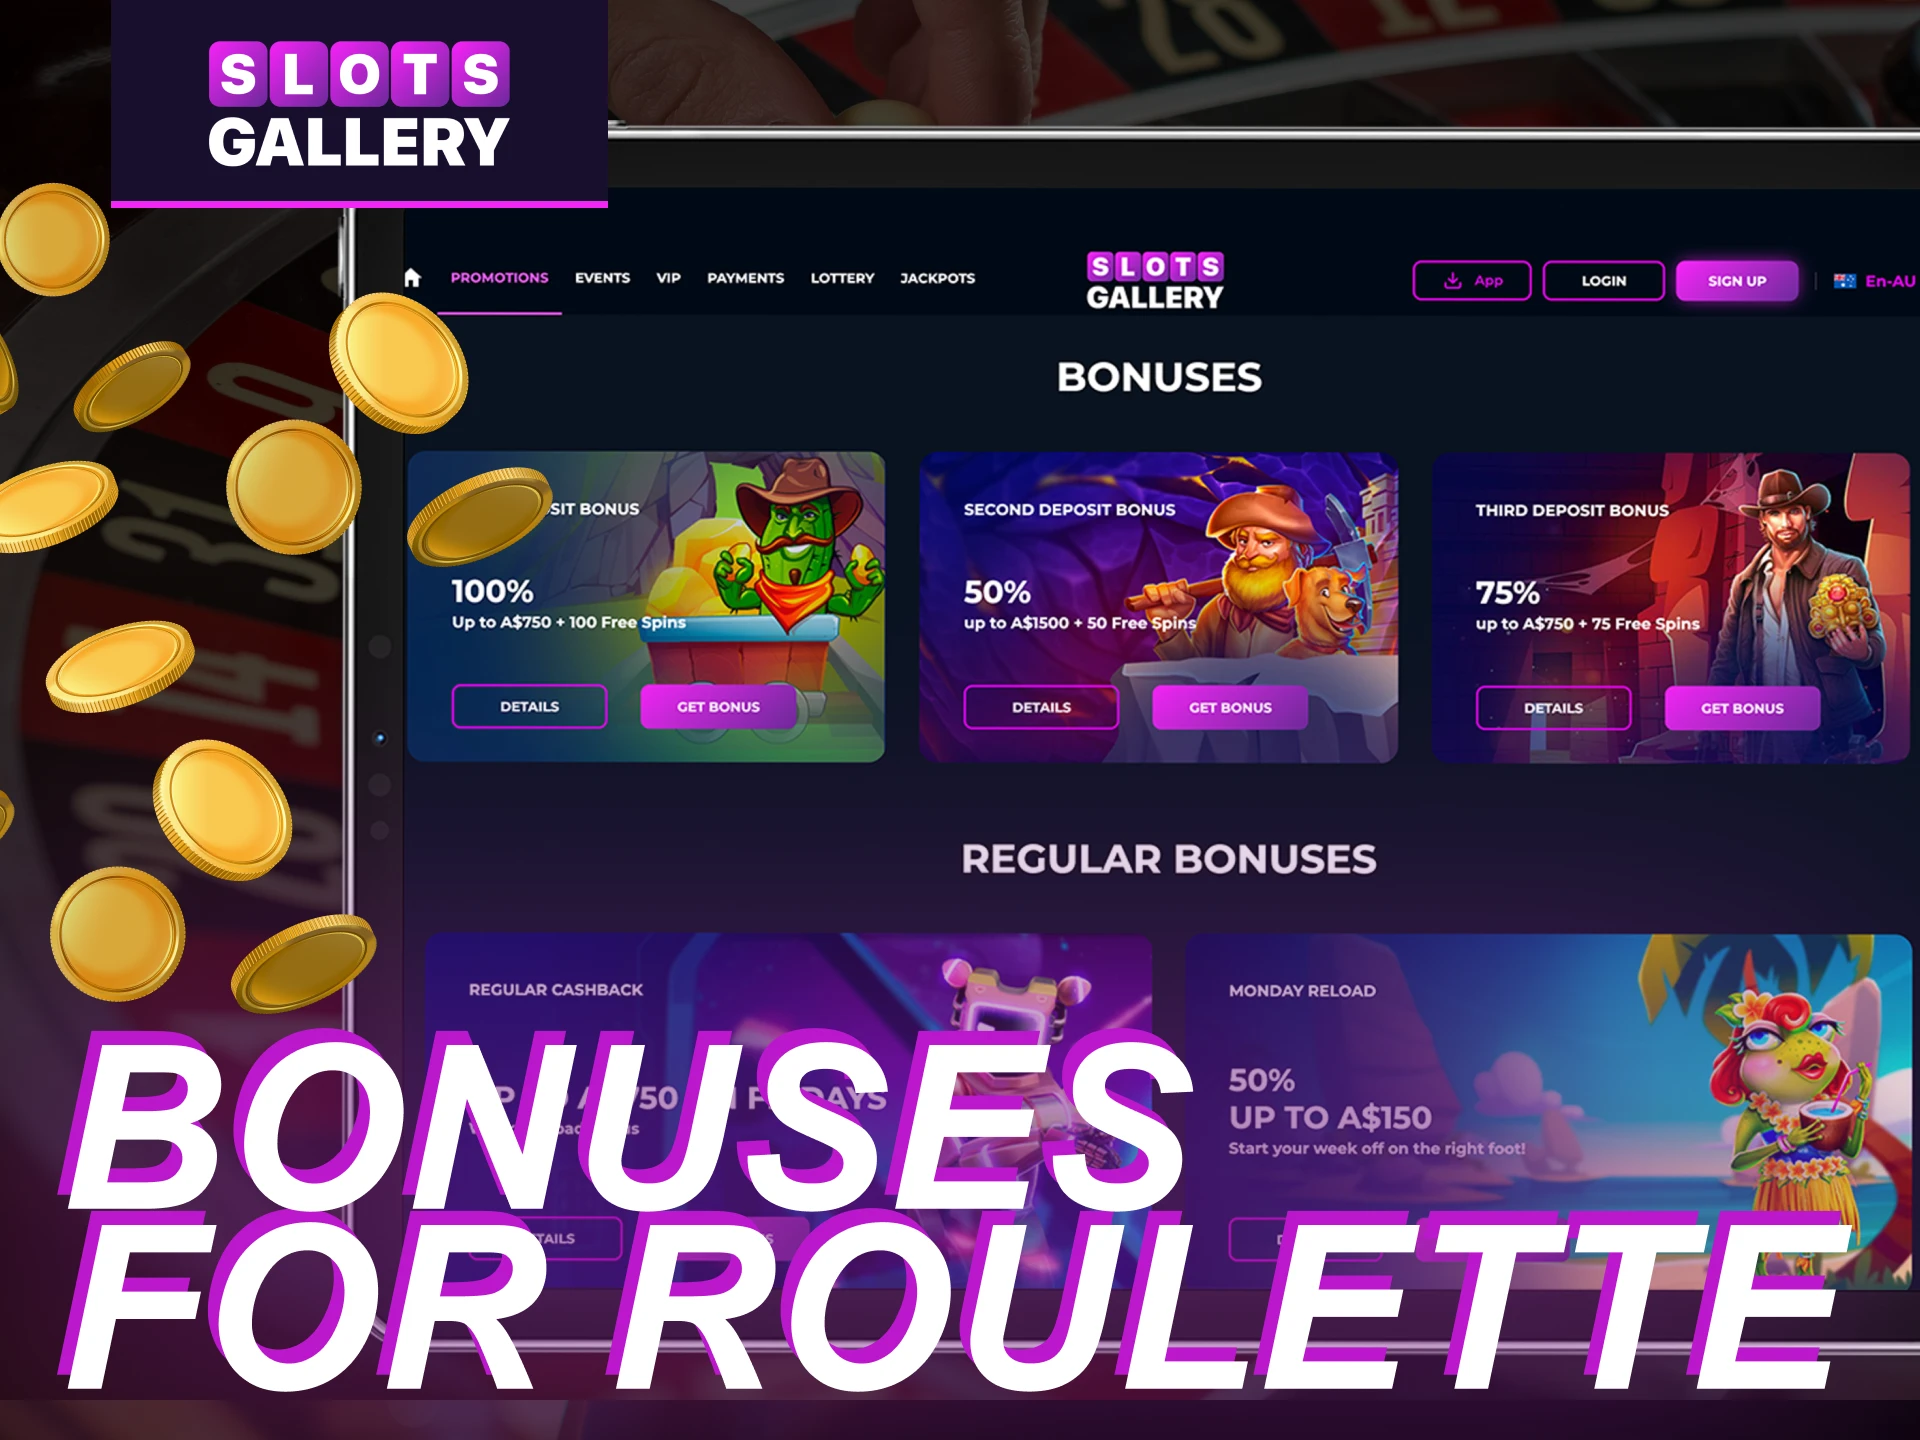 What bonuses for roulette games are there at Slots Gallery online casino.